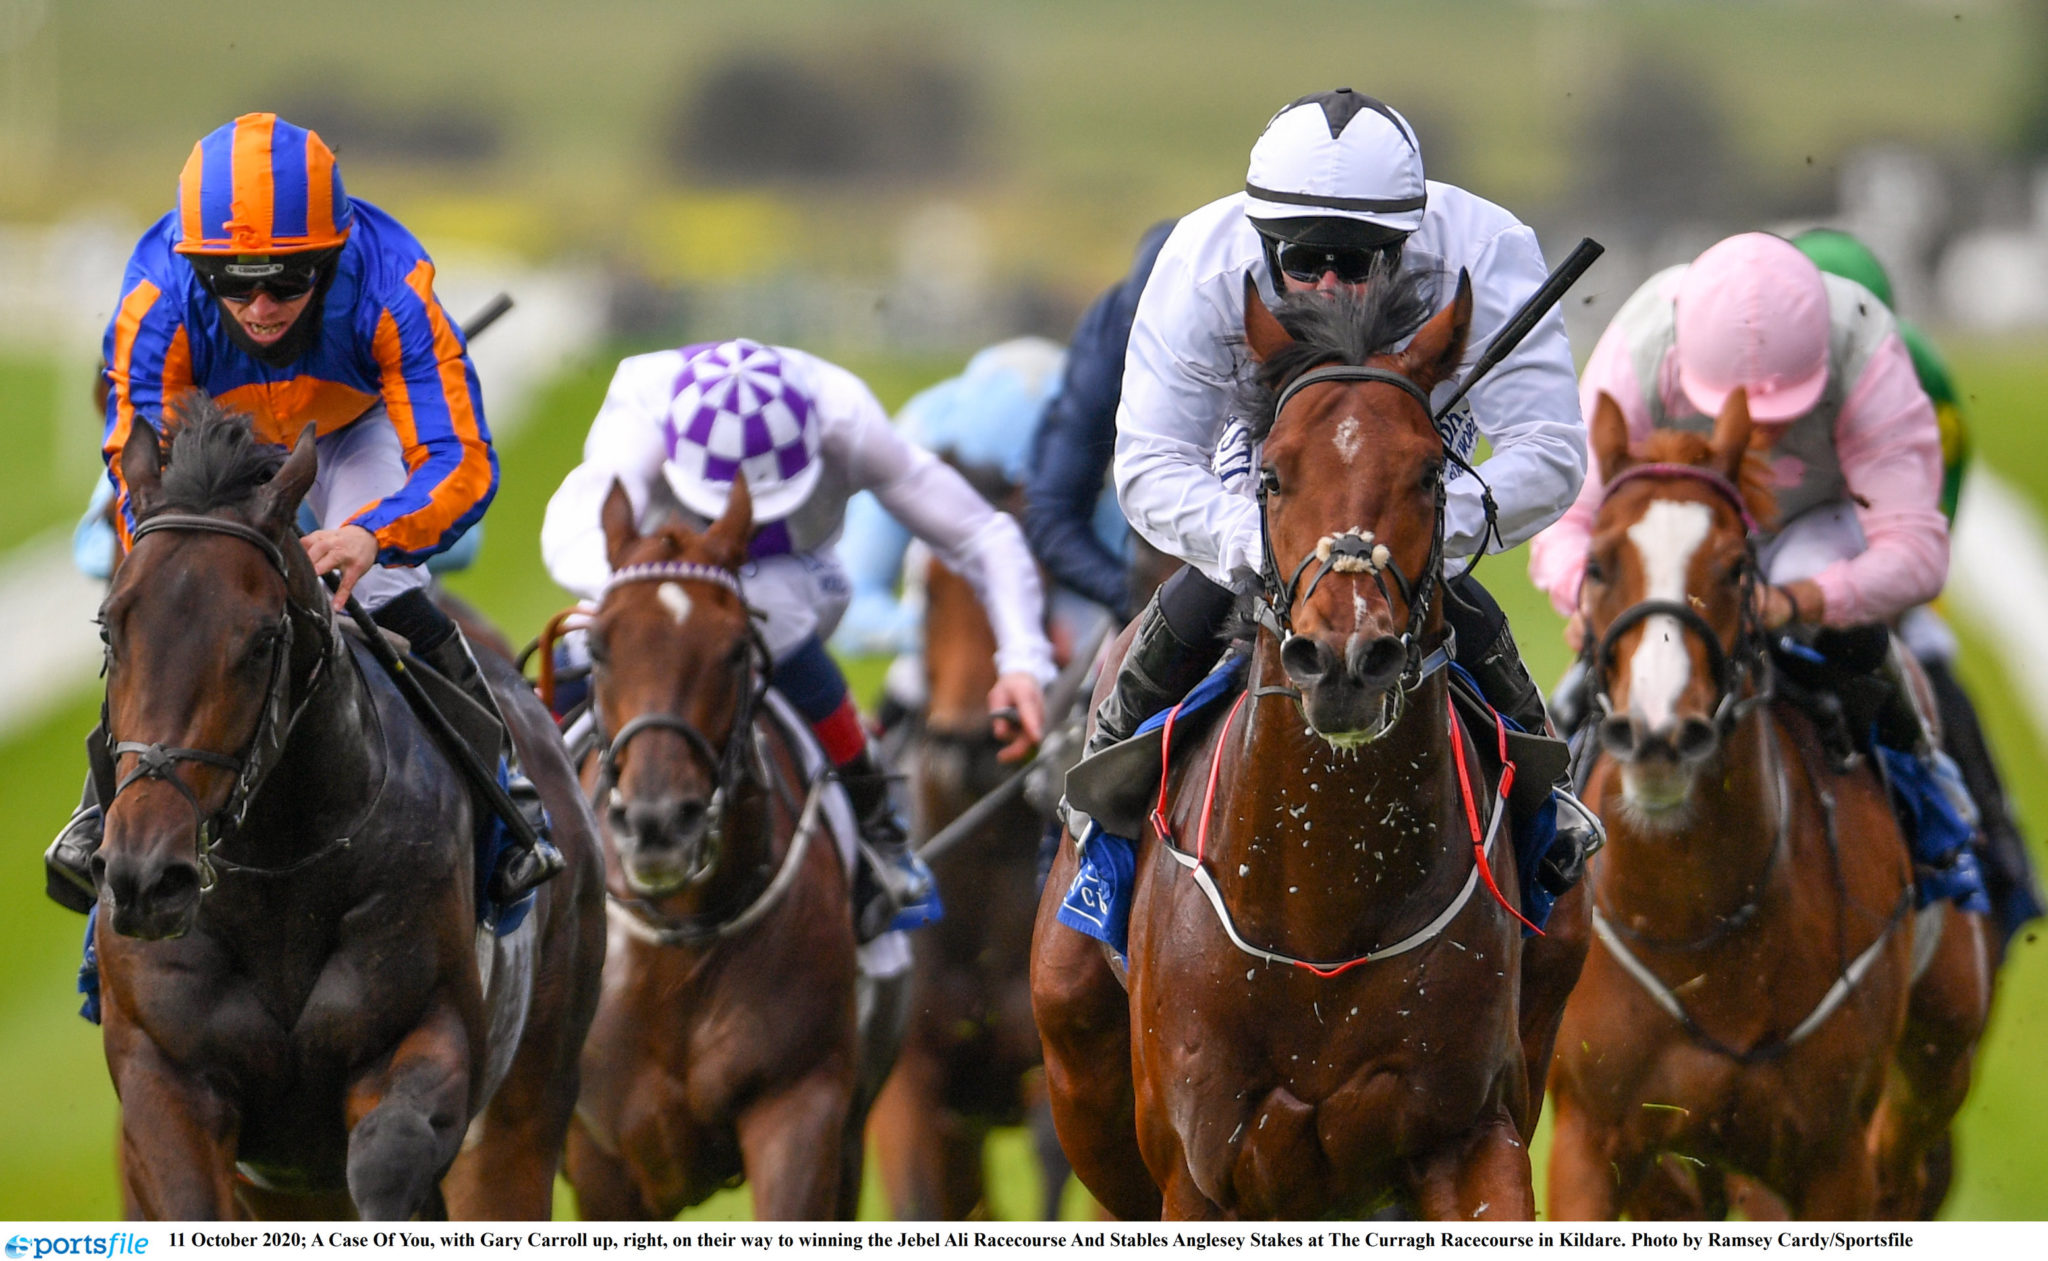 A Case Of You, with Gary Carroll up, right, on their way to winning the Jebel Ali Racecourse And Stables Anglesey Stakes at The Curragh Racecourse in Kildare